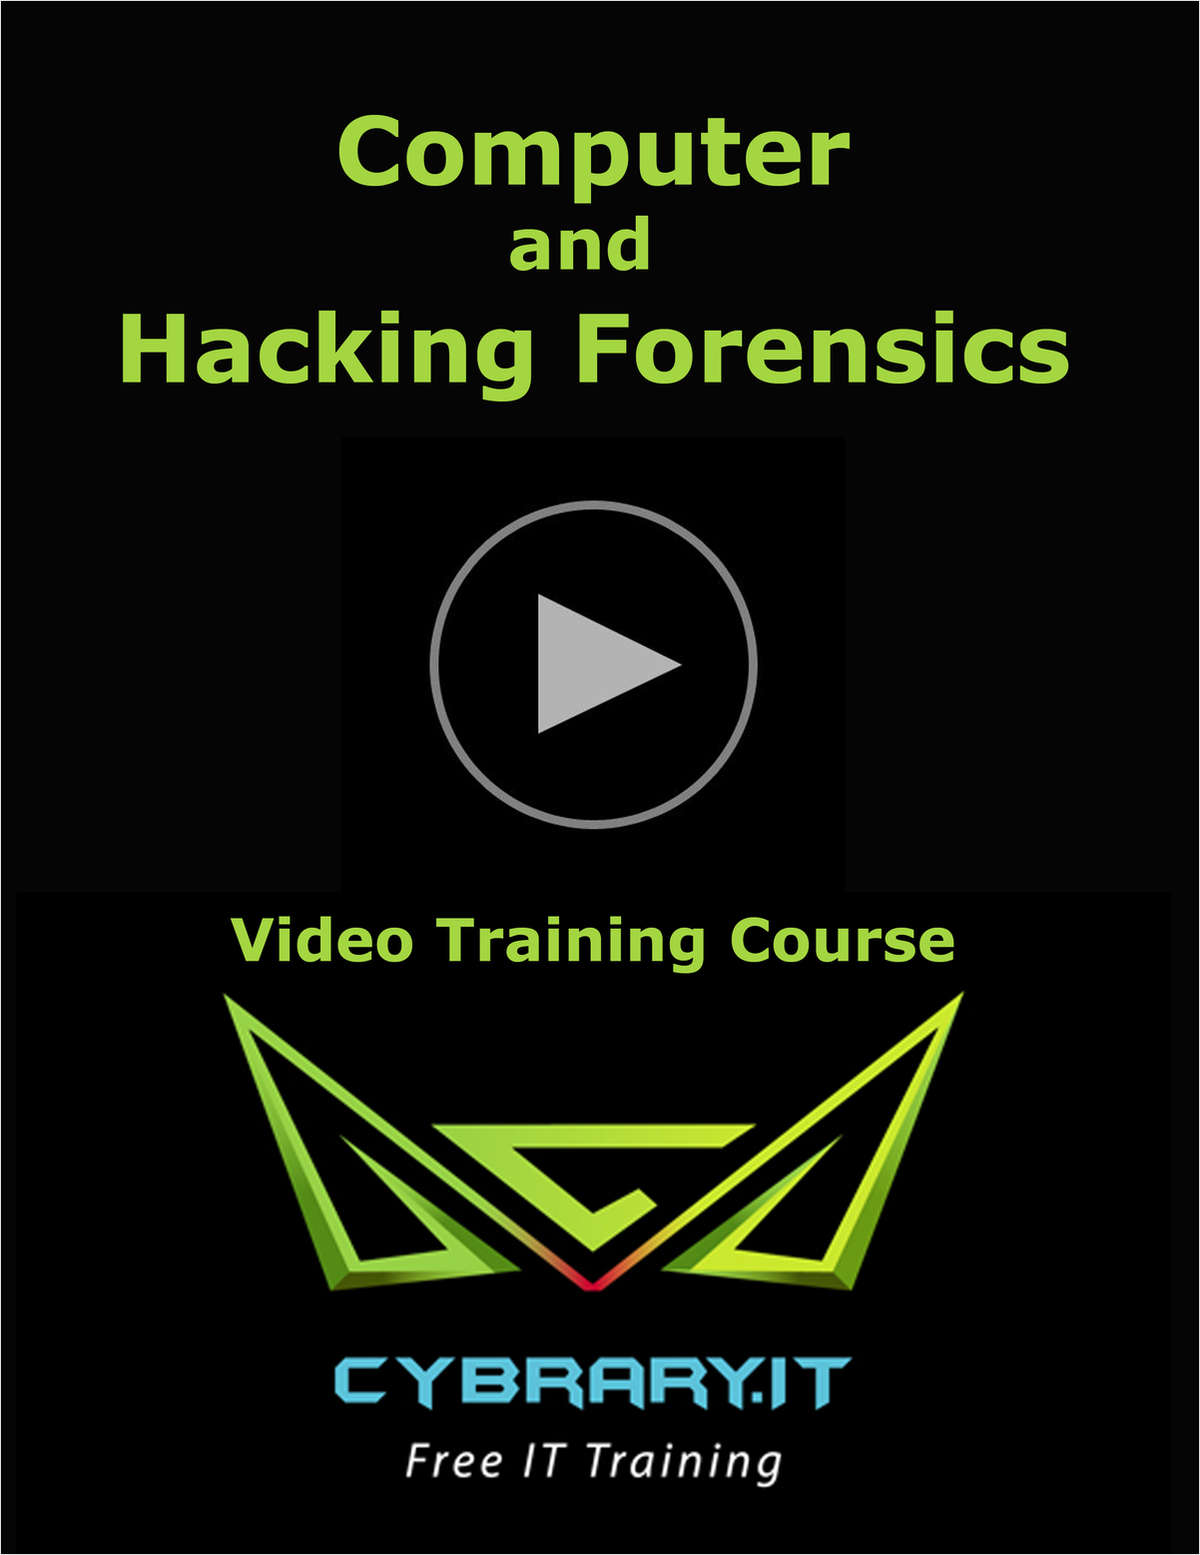 Computer and Hacking Forensics - FREE Video Training Course